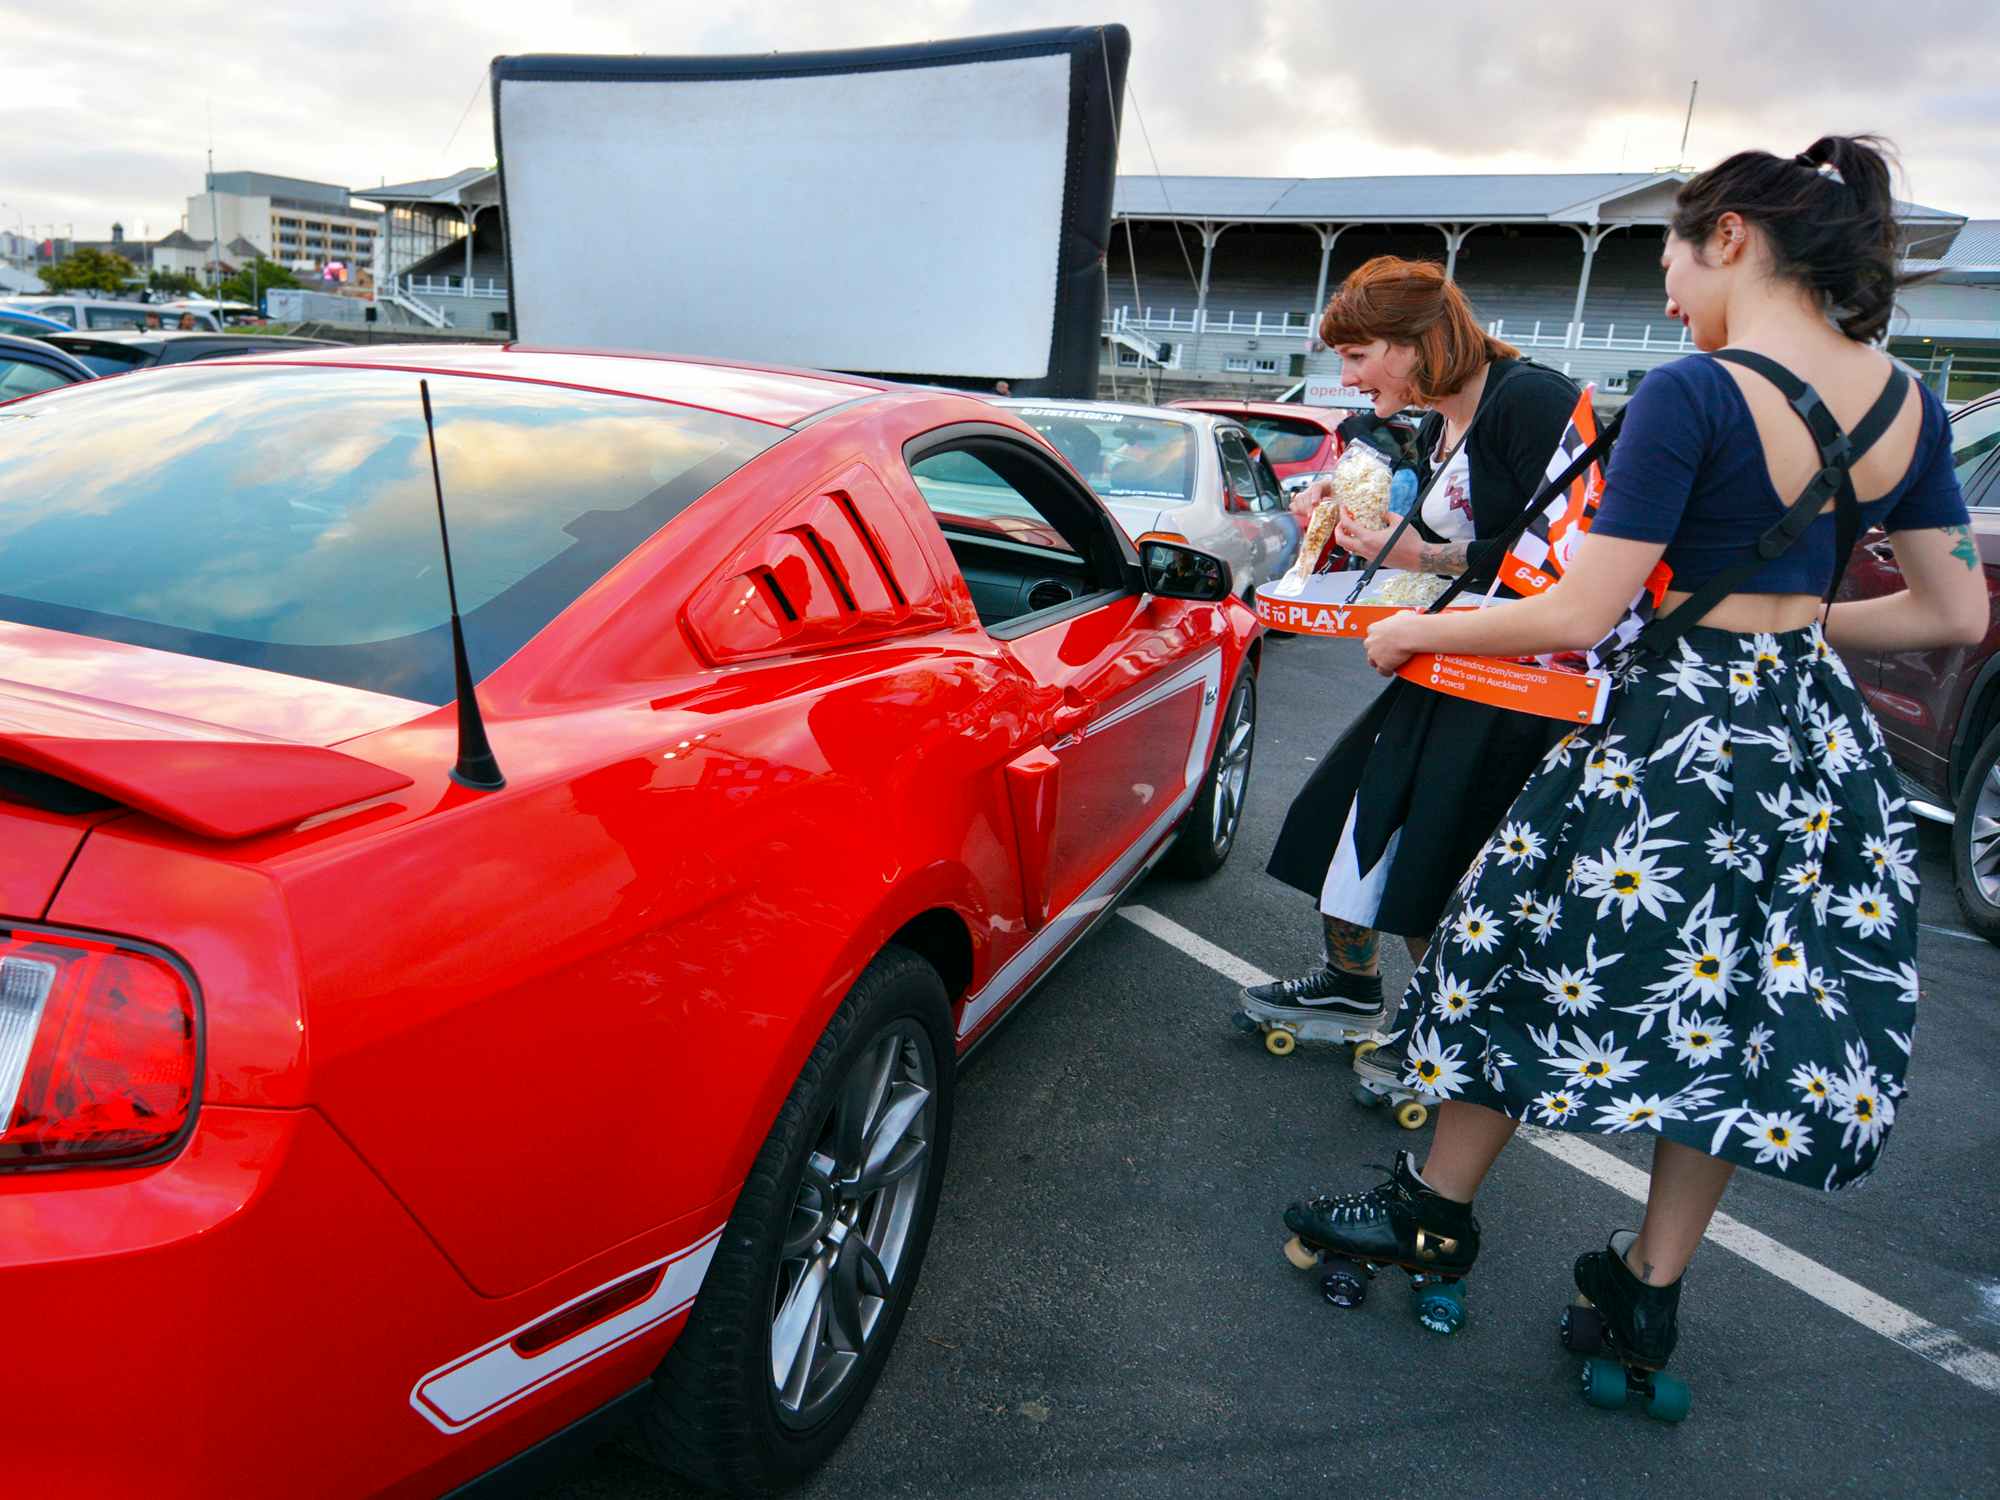 Some Drive-in workers on rollerskates offering concessions to people in their car